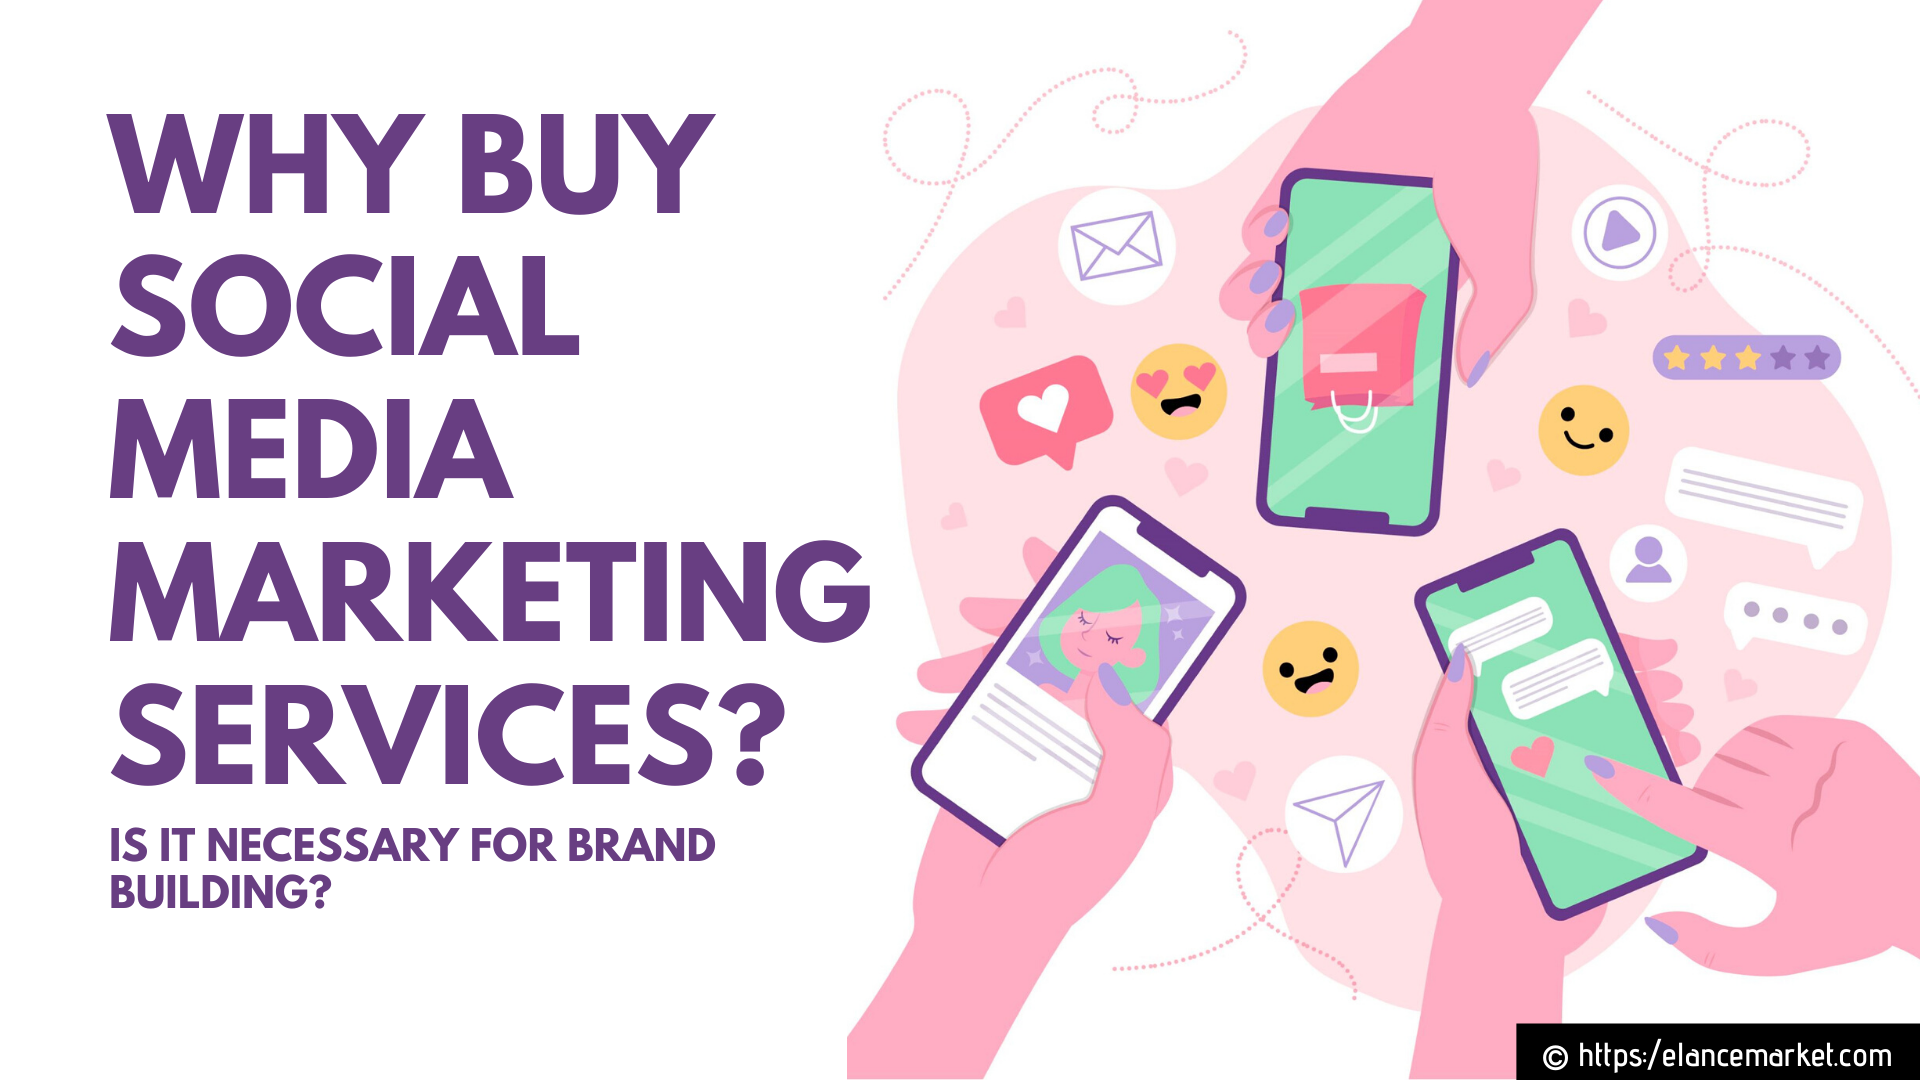 Why Buy Social Media Marketing Services? Is it necessary for Brand Building?